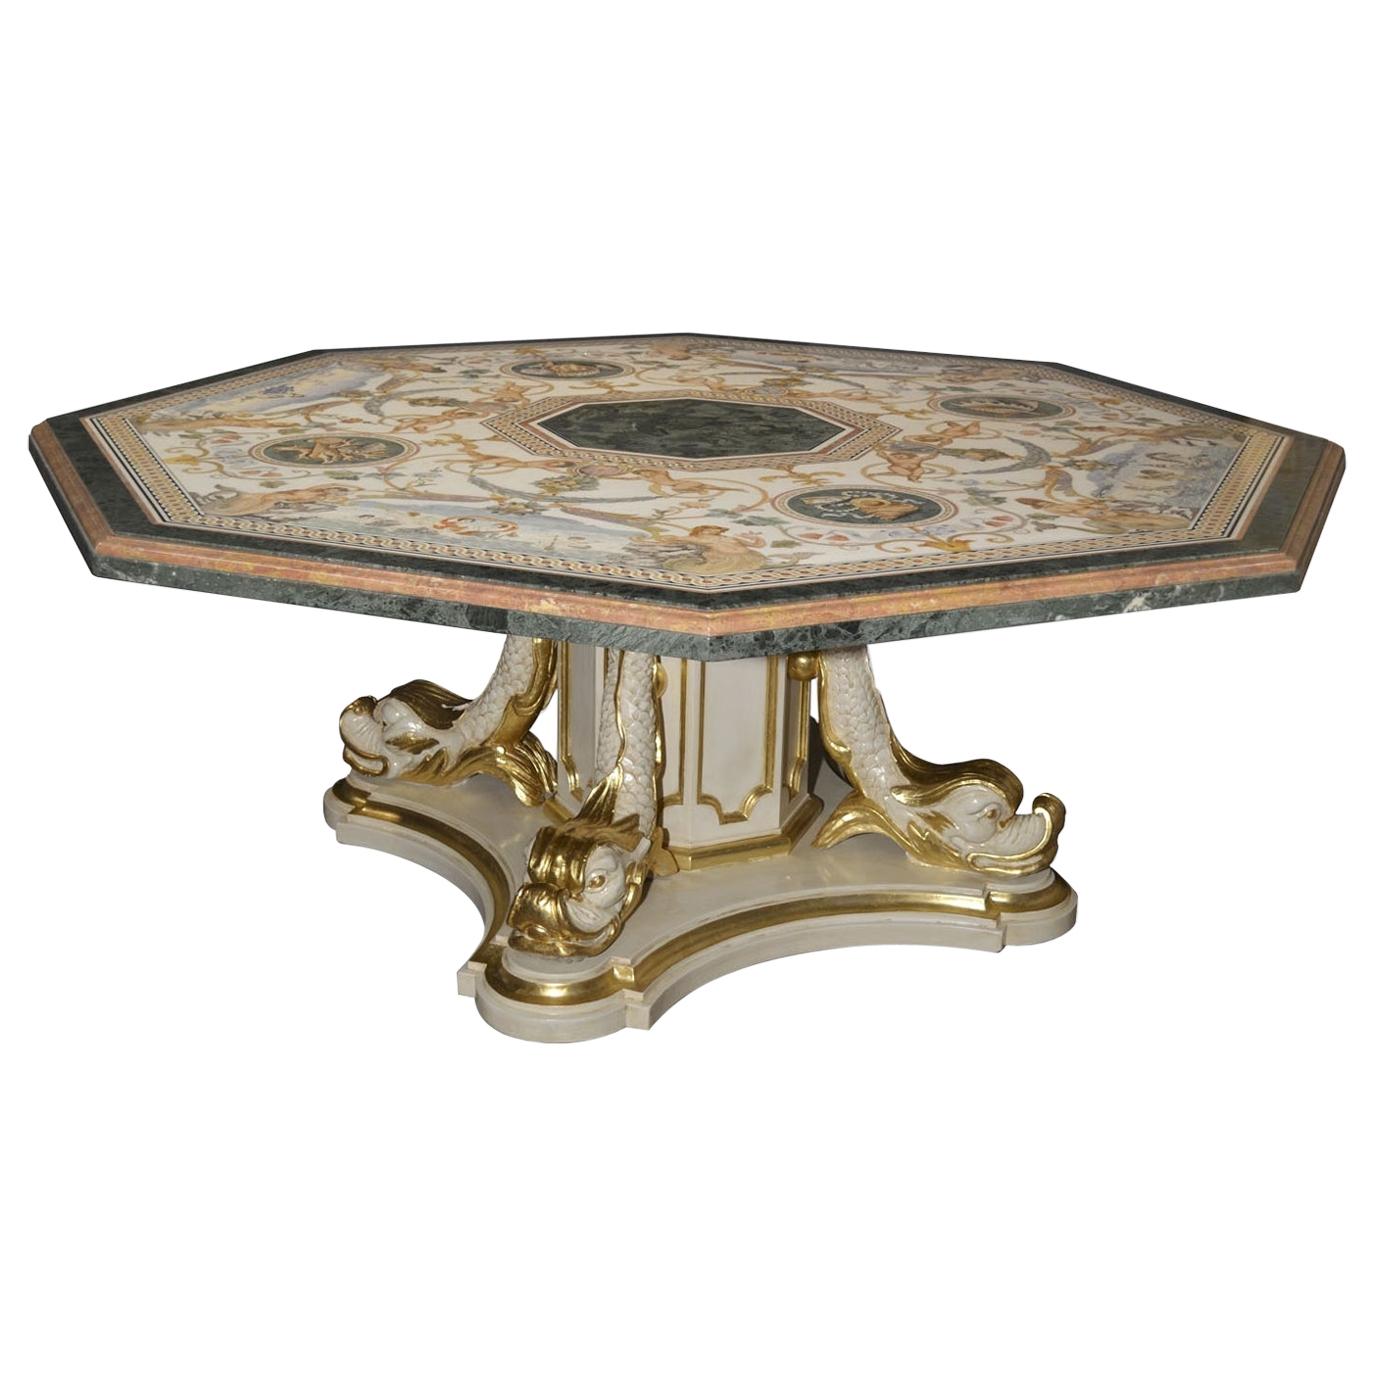 Octagonal table represents one of the Cupioli masterpieces. The imposing dimension of the top cm. 210 x 210 and the wealth of 3 prestigious marbles as pure white, royal yellow and green guatemala are a perfect background for such an important